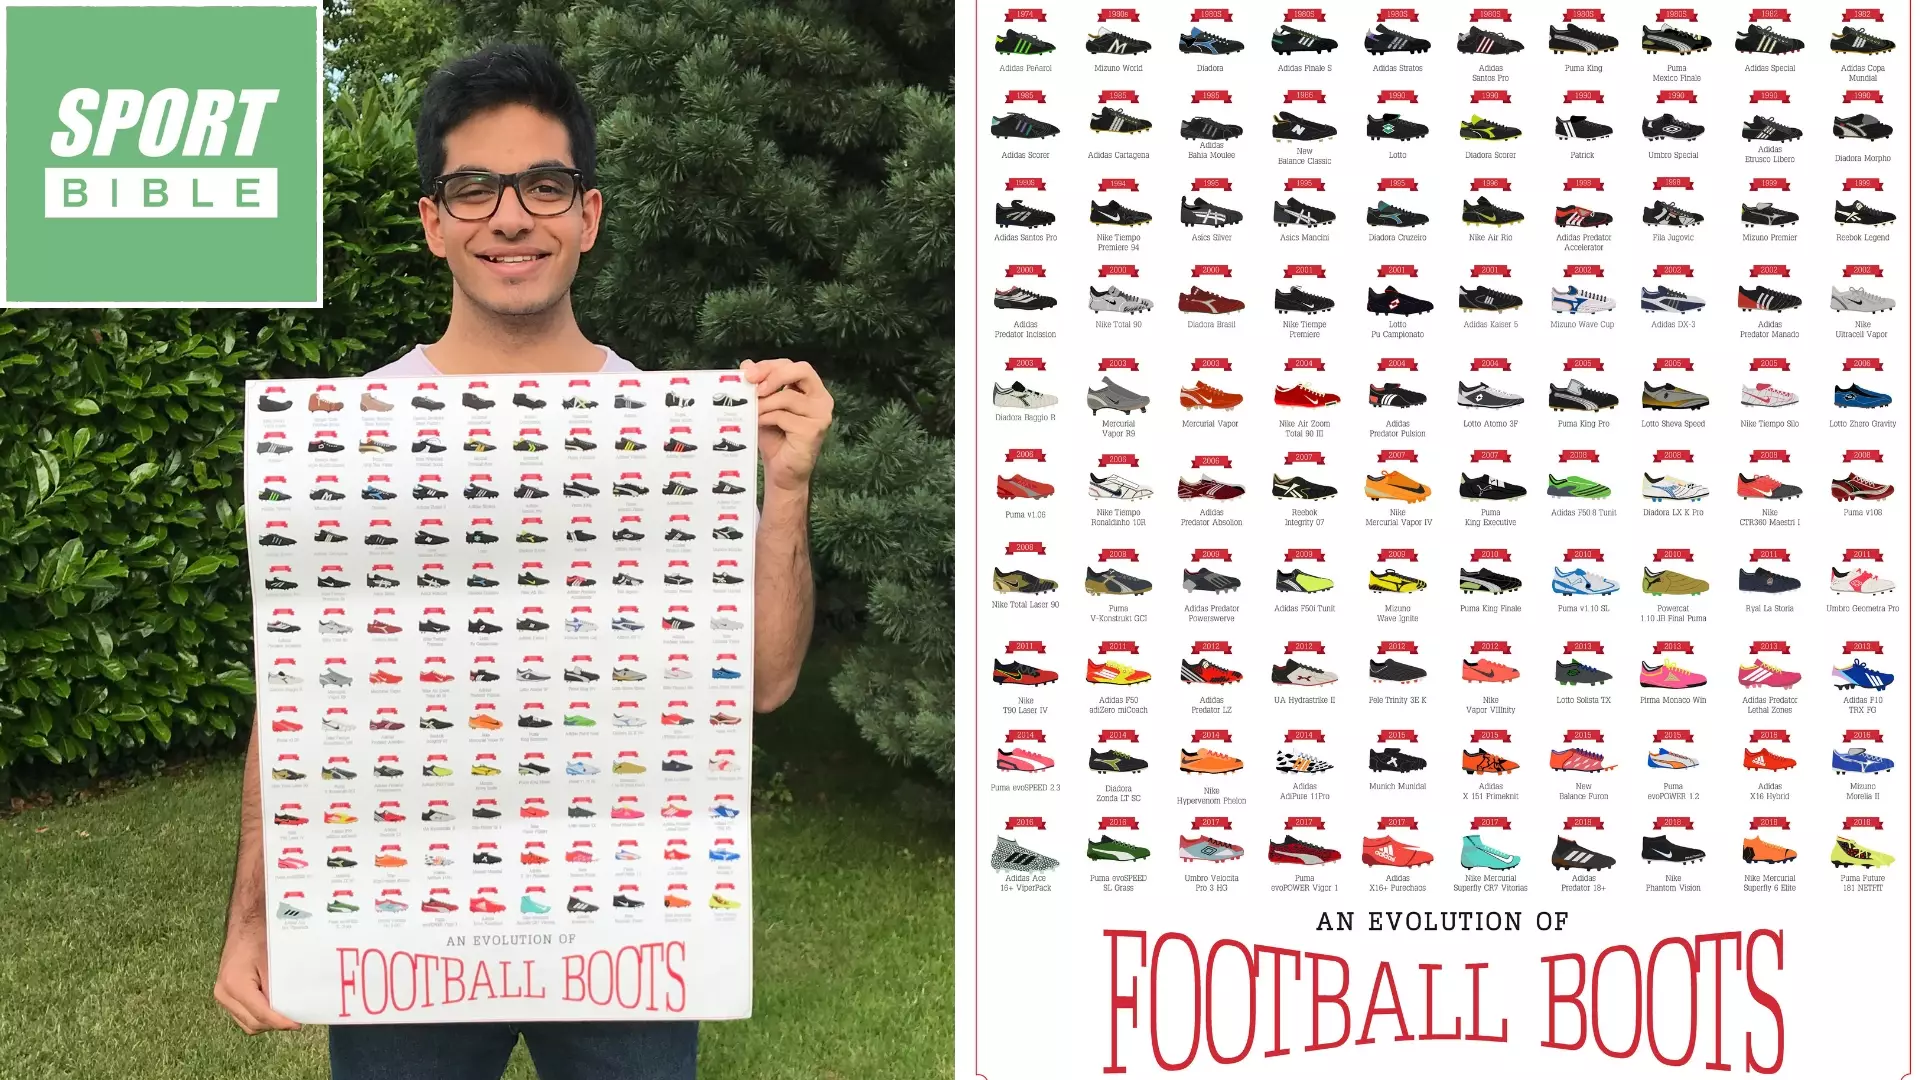 Scorpia Prints founder Shikhar Sachdev, 22, posing with a copy of the 'Evolution of Football Boots' poster.